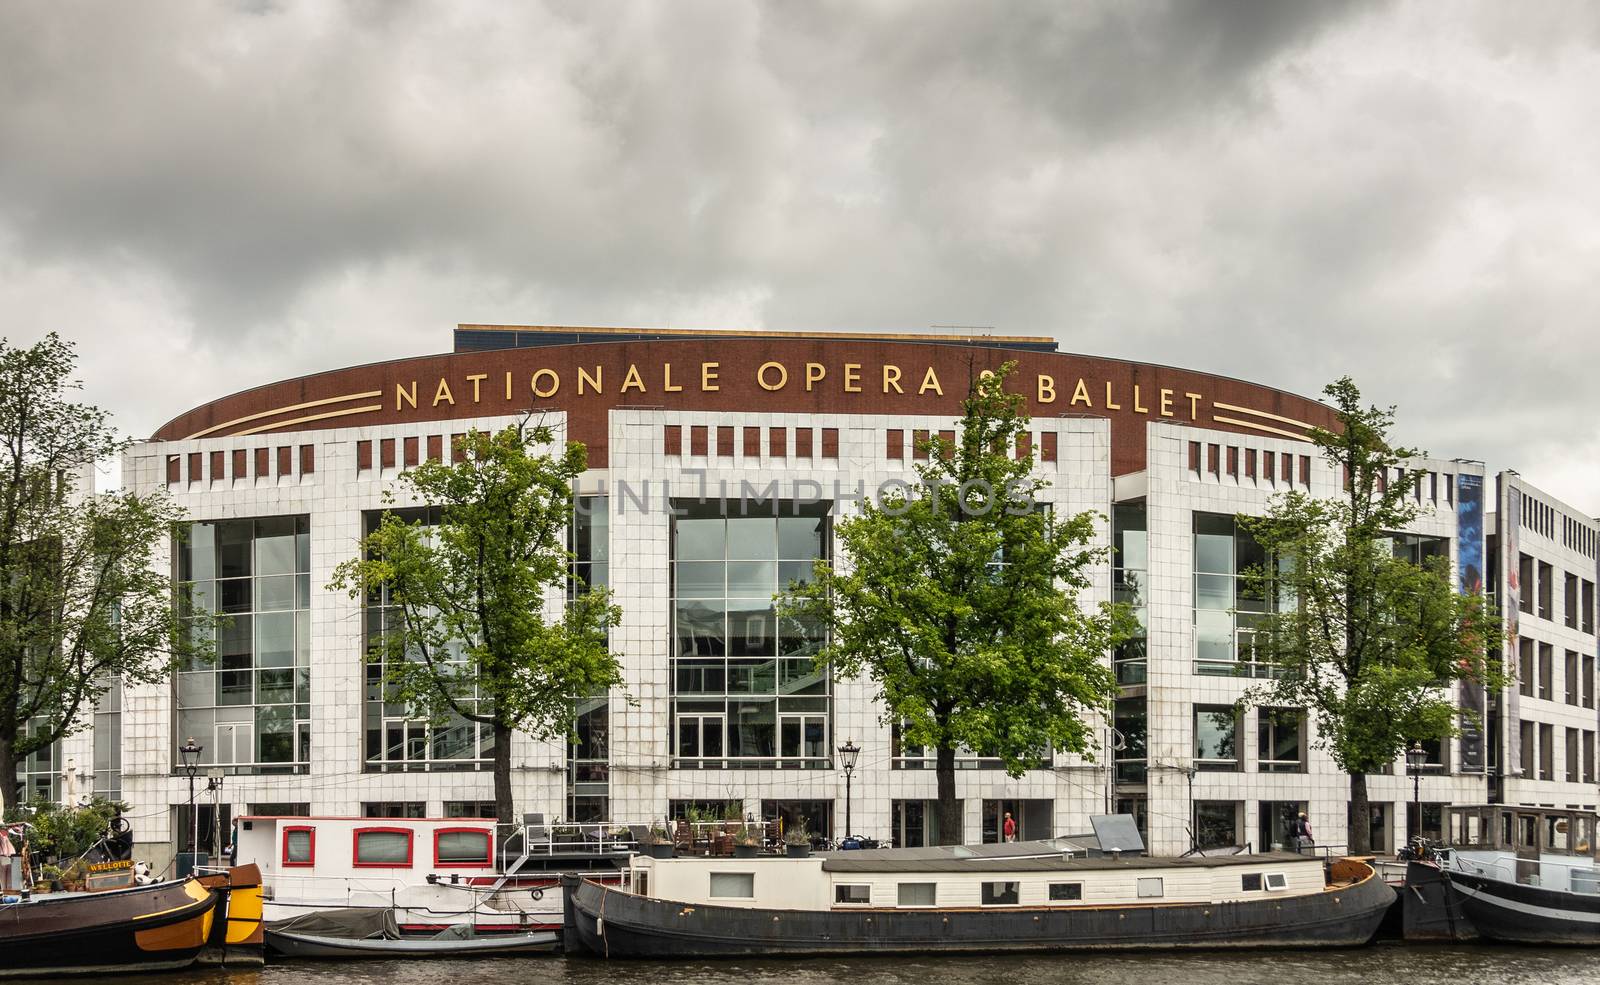 Nationale Opera and Ballet theater downtown Amsterdam, the Nethe by Claudine